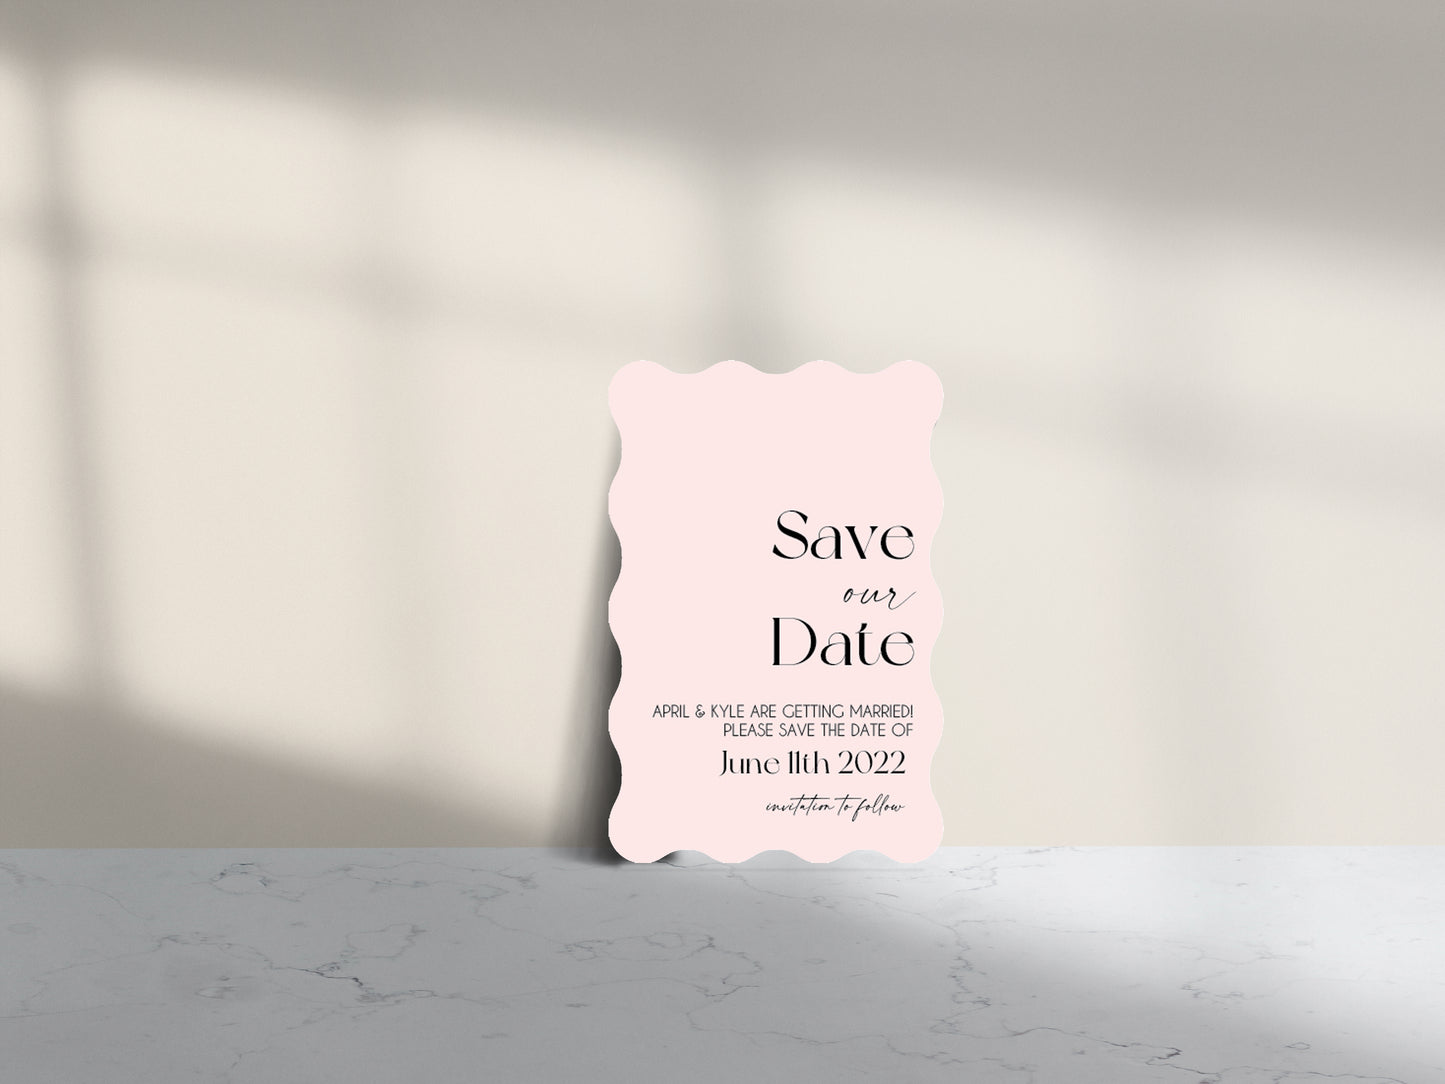 Together Save the Date